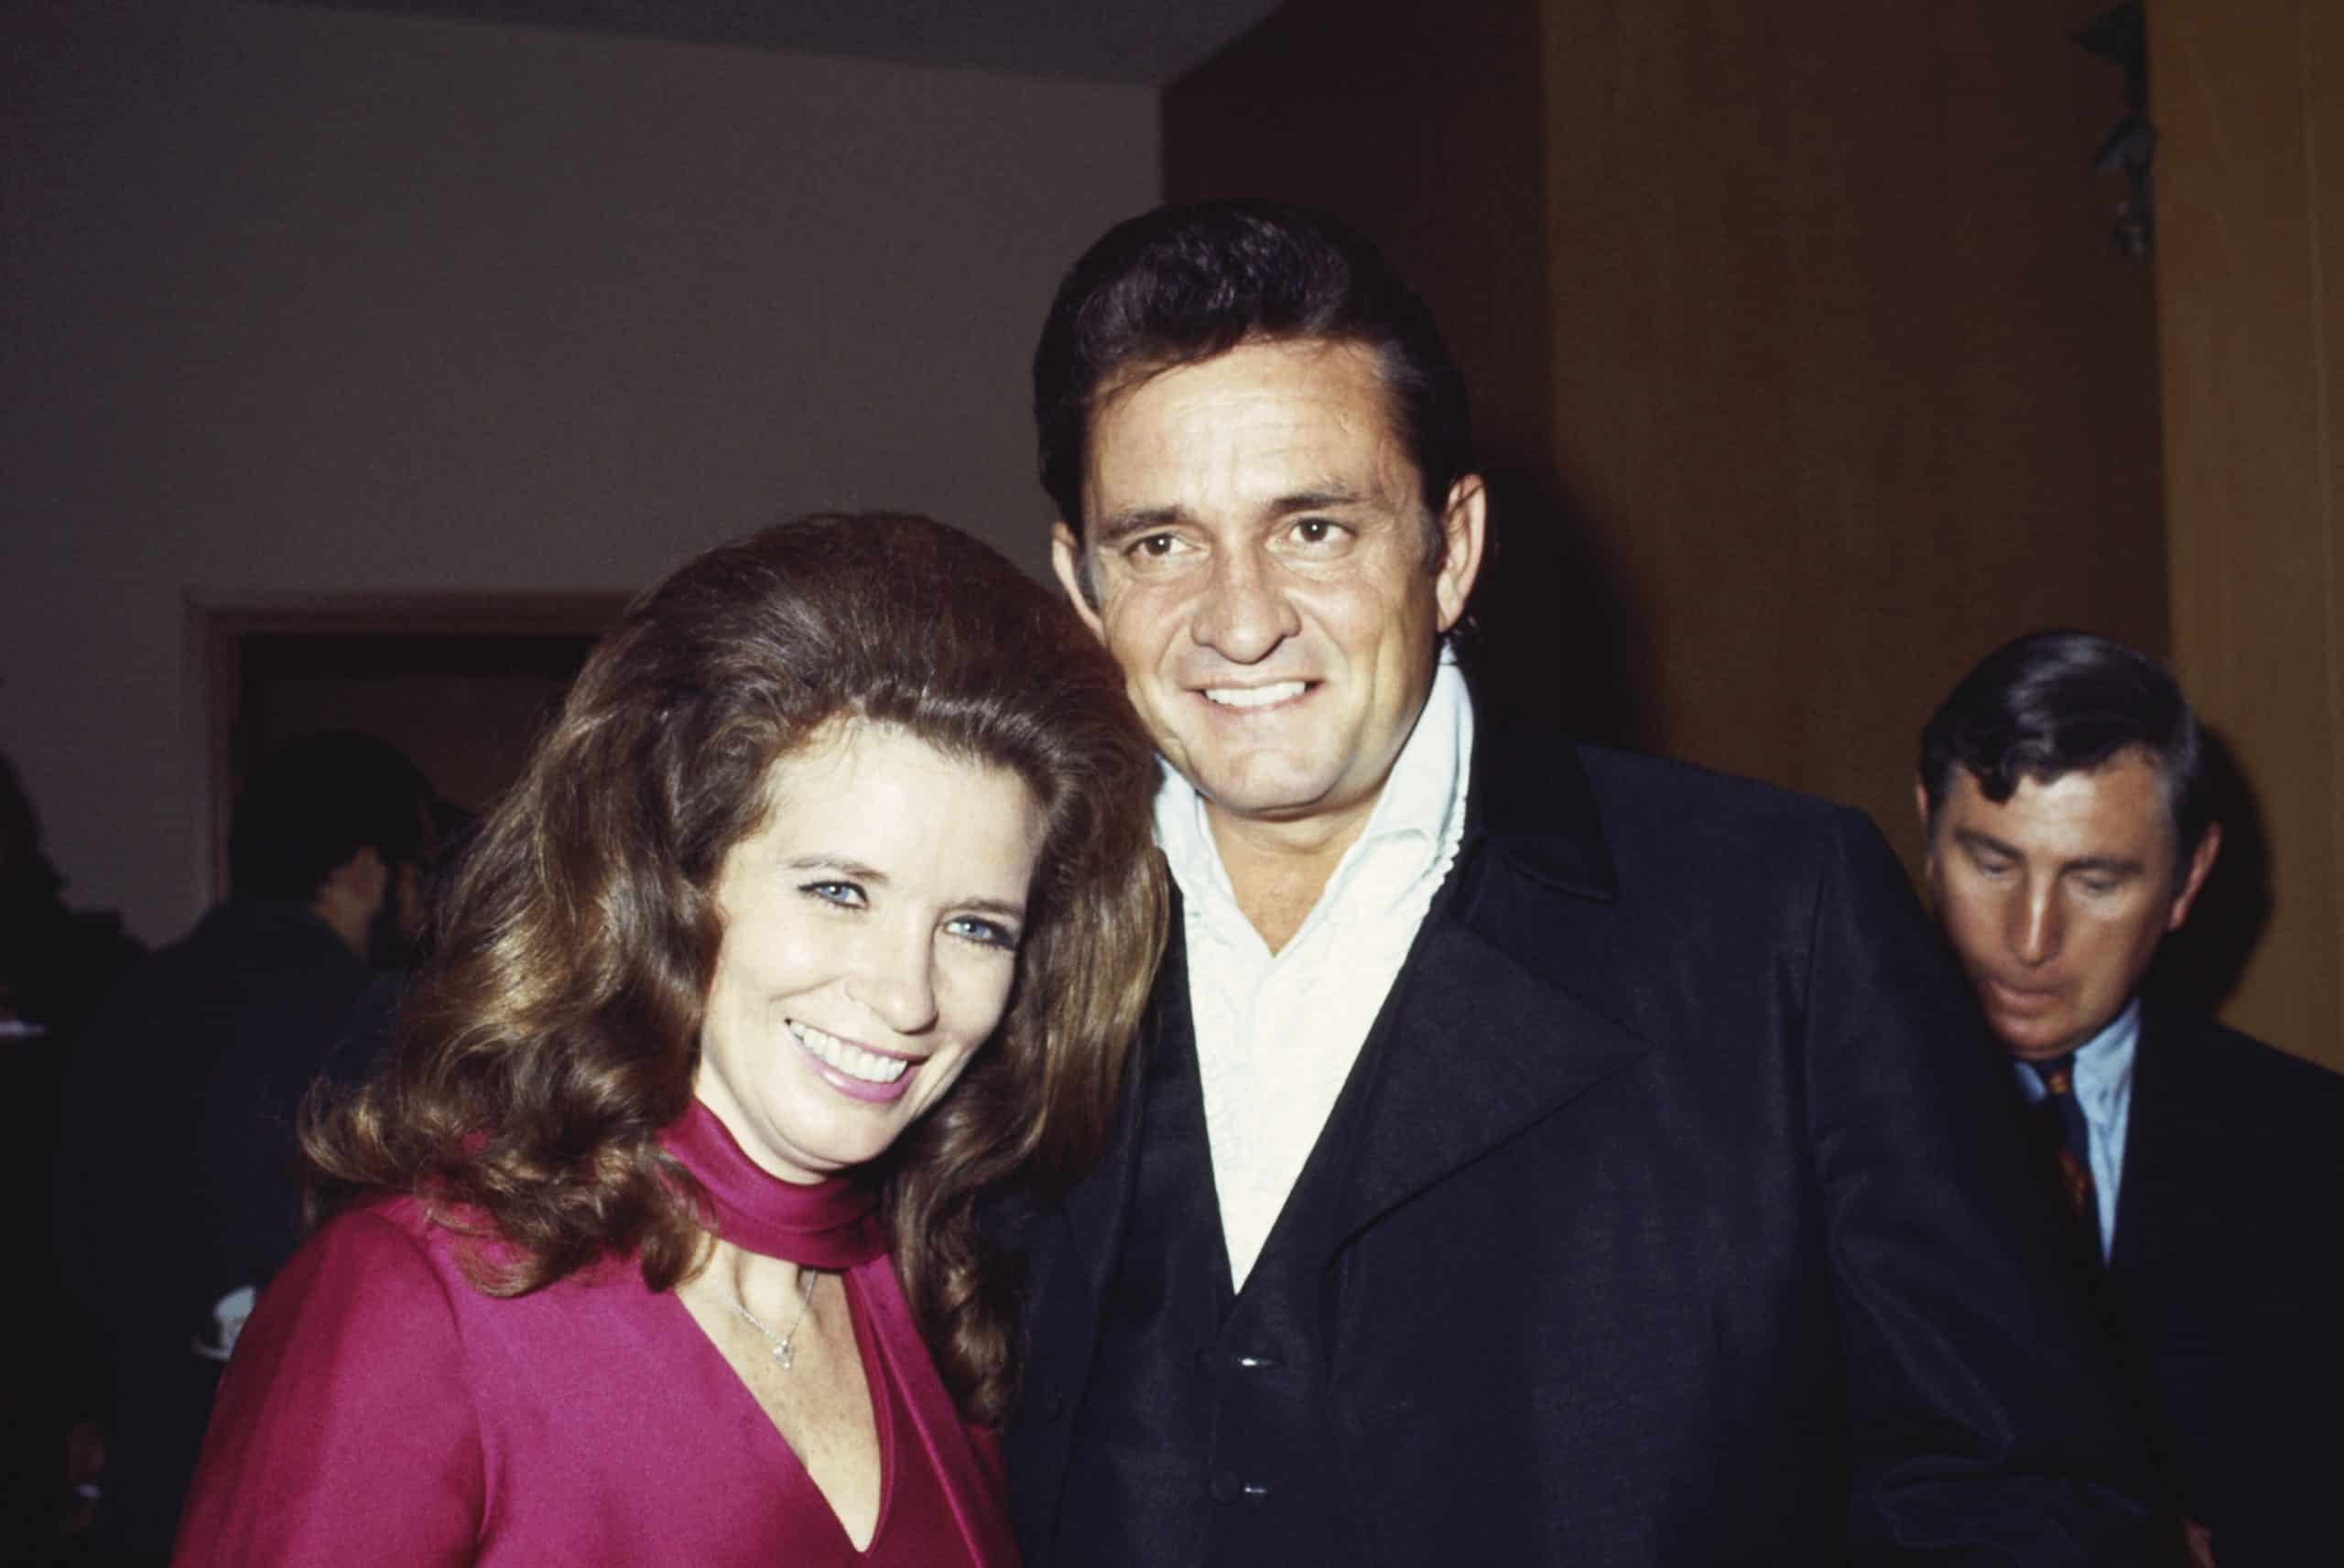 CALIFORNIA - SEPTEMBER 1969: Married country singers Johnny Cash & June Carter Cash pose for a portrait at an event in September 1969 in California. (Photo by Michael Ochs Archives/Getty Images)